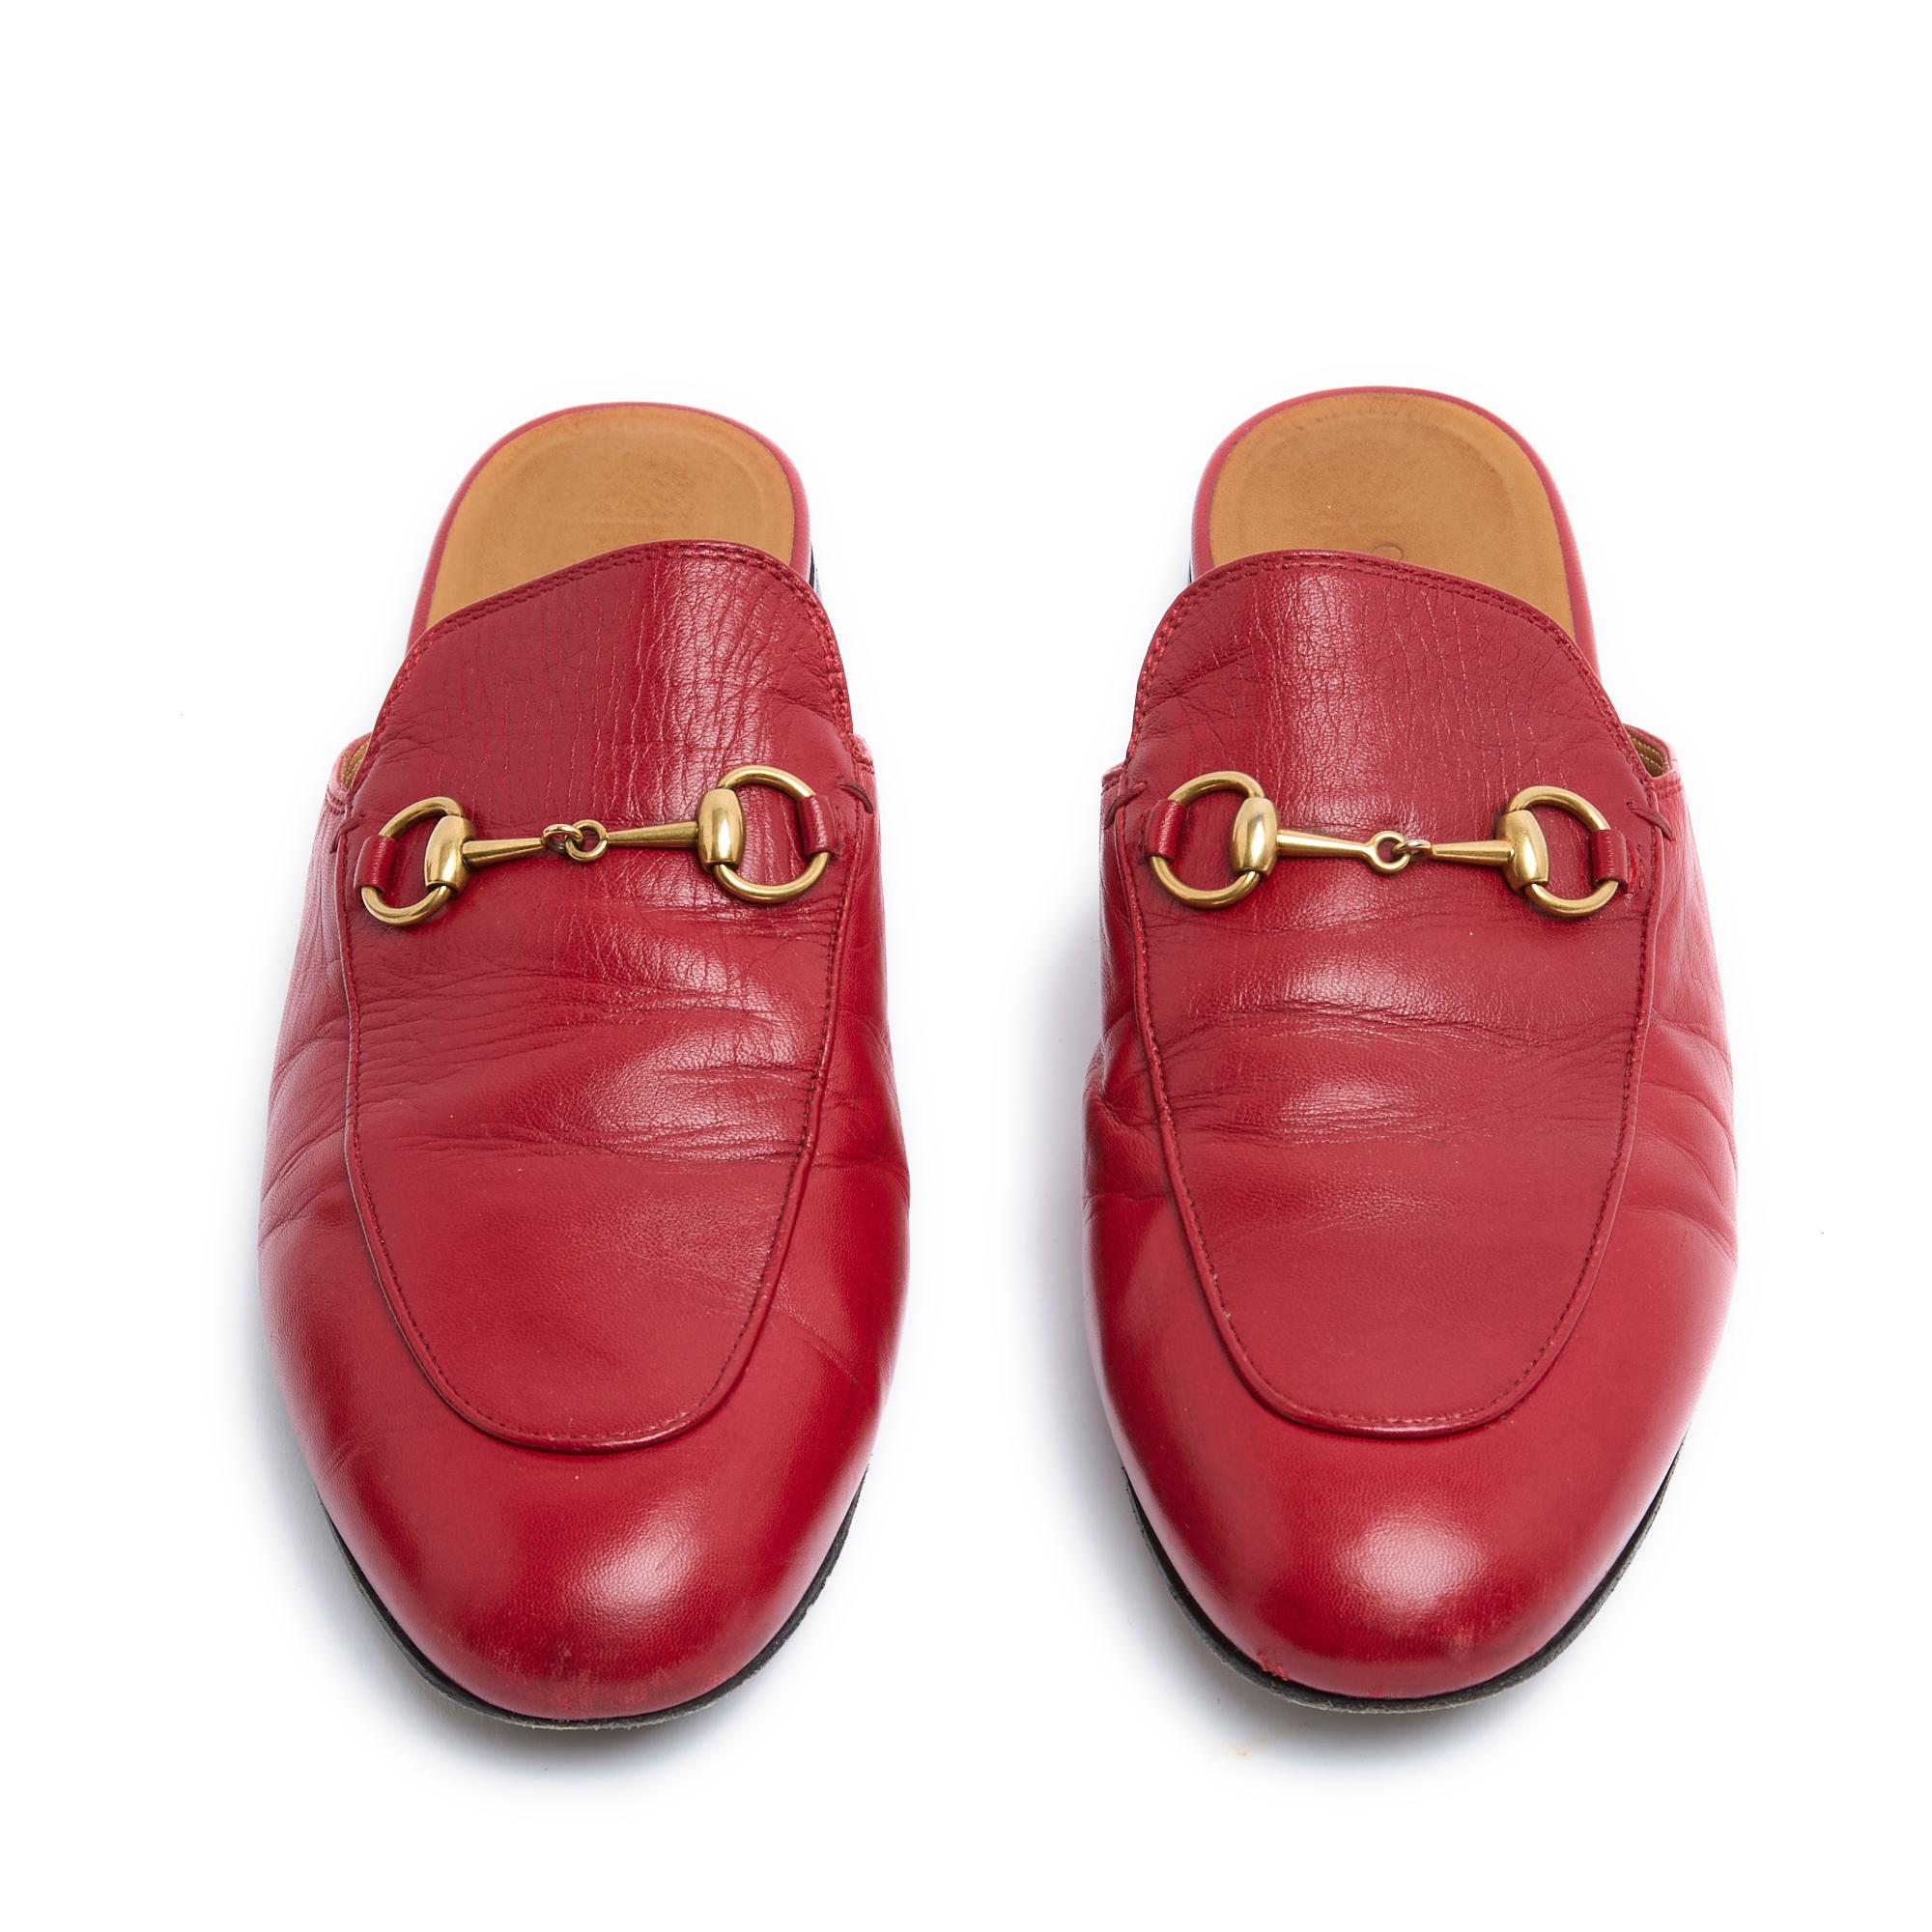 Gucci Princetown model loafers in red leather and horsebit pattern in gold metal. Size 39EU or UK6 and US8.5, heel 1 cm, insole 25 cm (size a little small). The mules have been worn but they are in very good condition, perfect as socks or on pretty